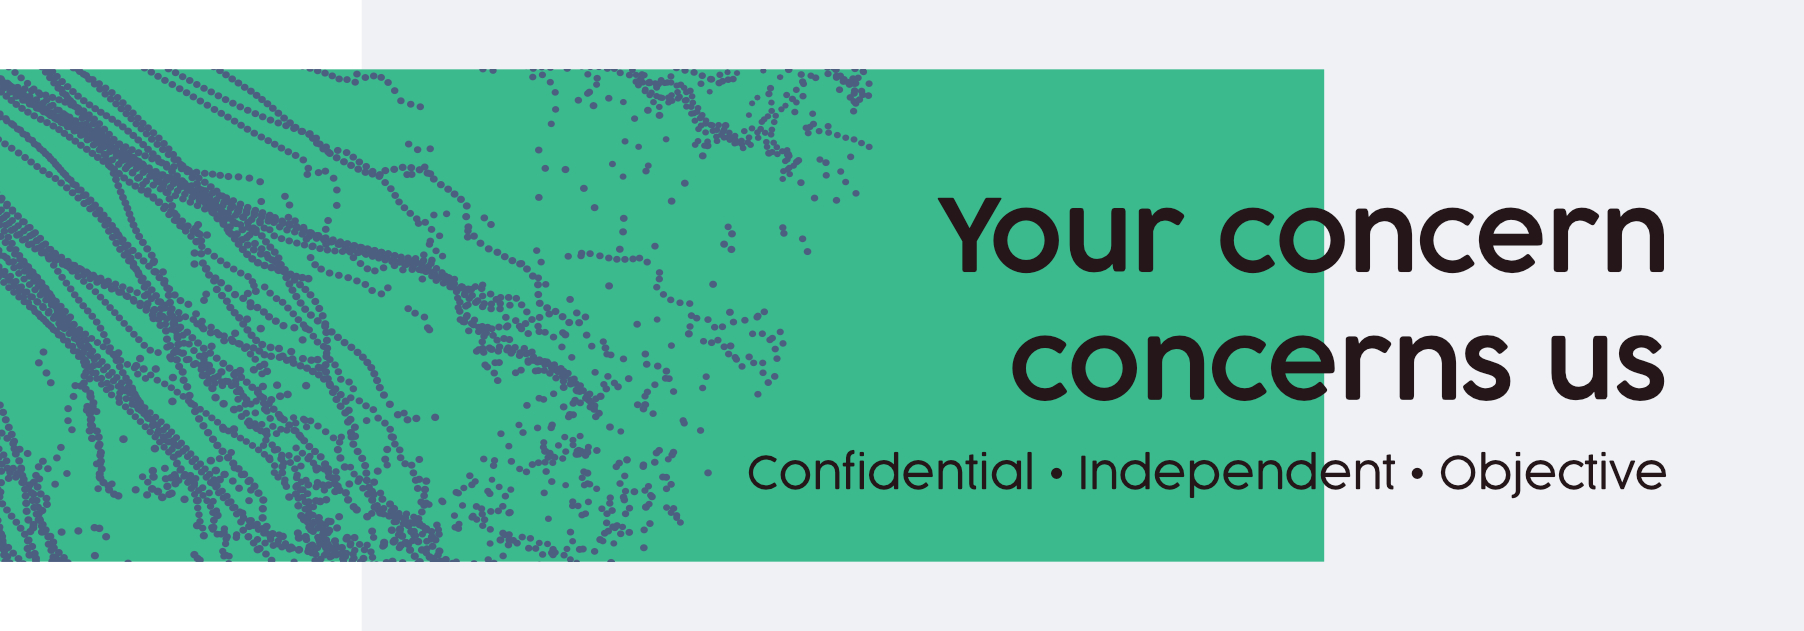 ”Your concern concerns us. Confidential - Independent - Objective.